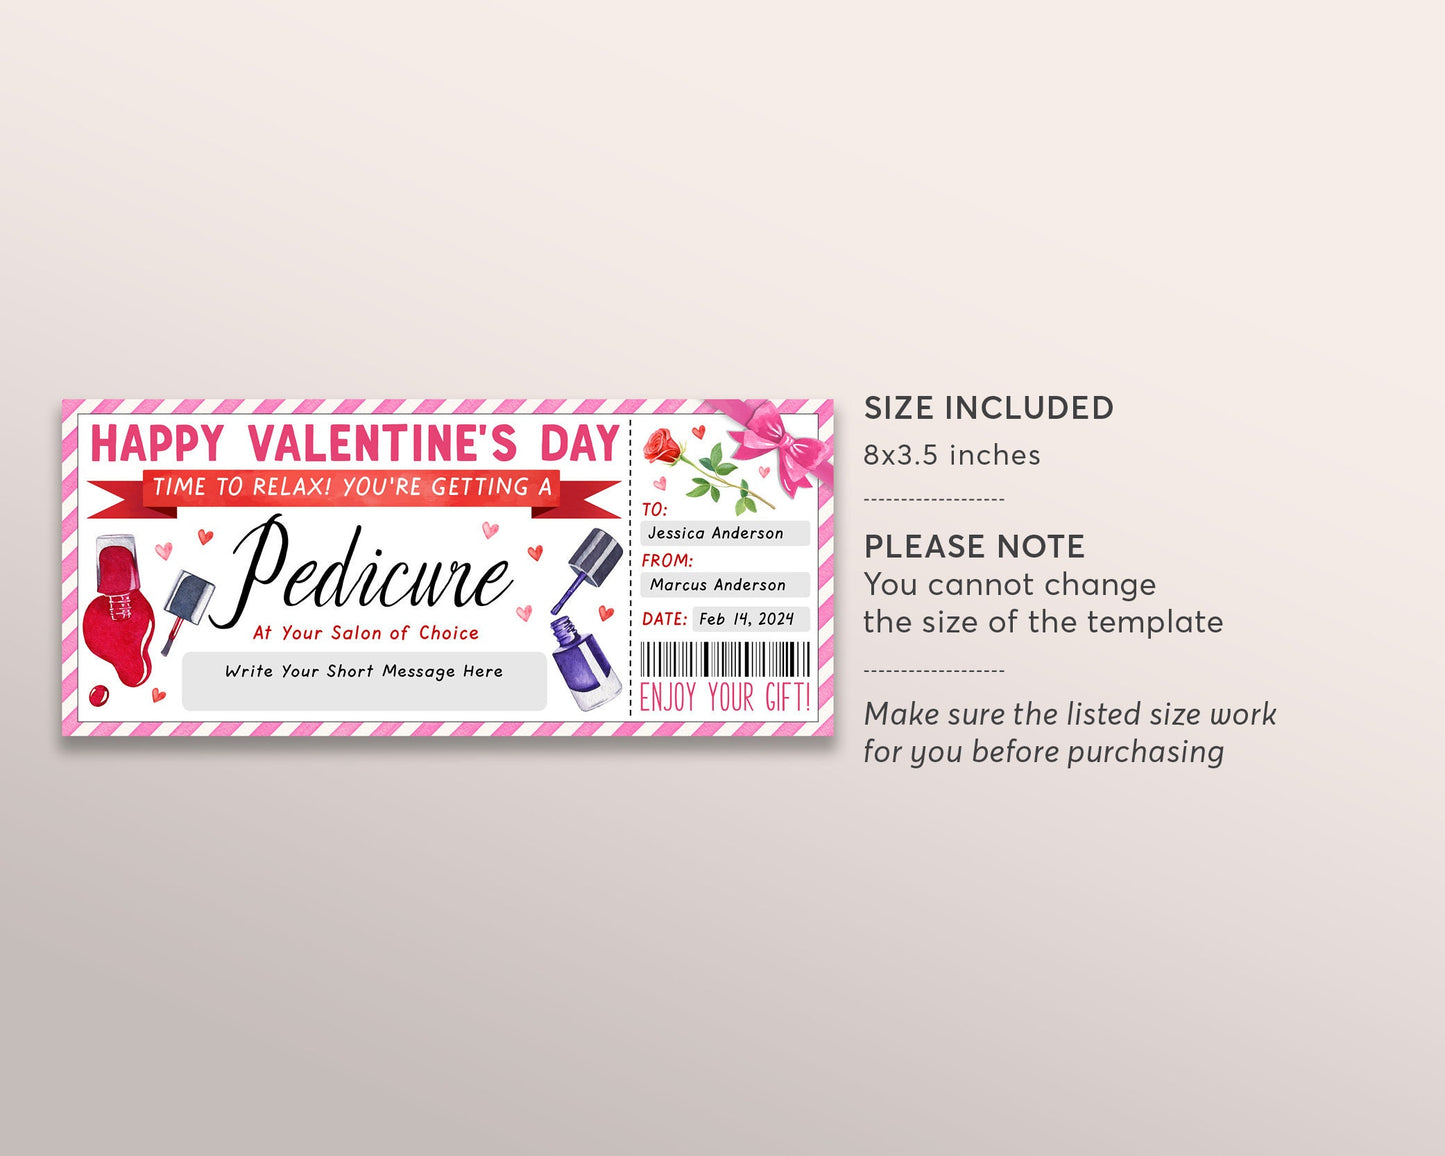 Valentines Day Pedicure Ticket Editable Template, Surprise Mani Pedi Gift Certificate For Girlfriend Wife, Nail Salon Spa Voucher Coupon